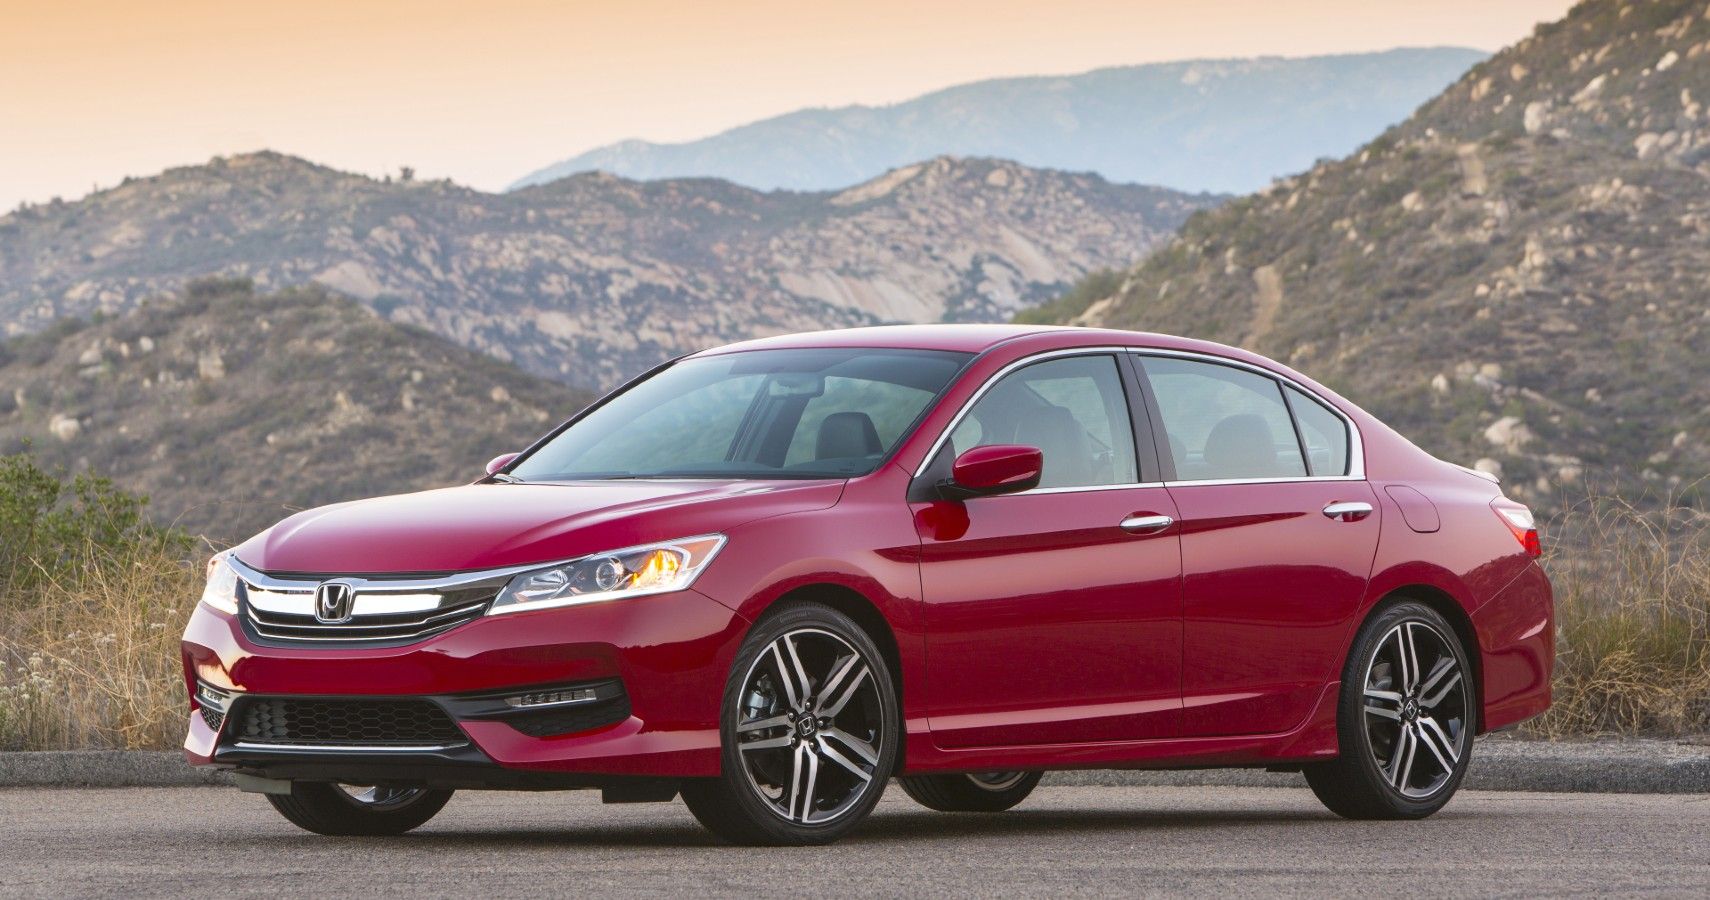 Here’s What Makes The 2016 Honda Accord One Of The Best Used Modern Sedans